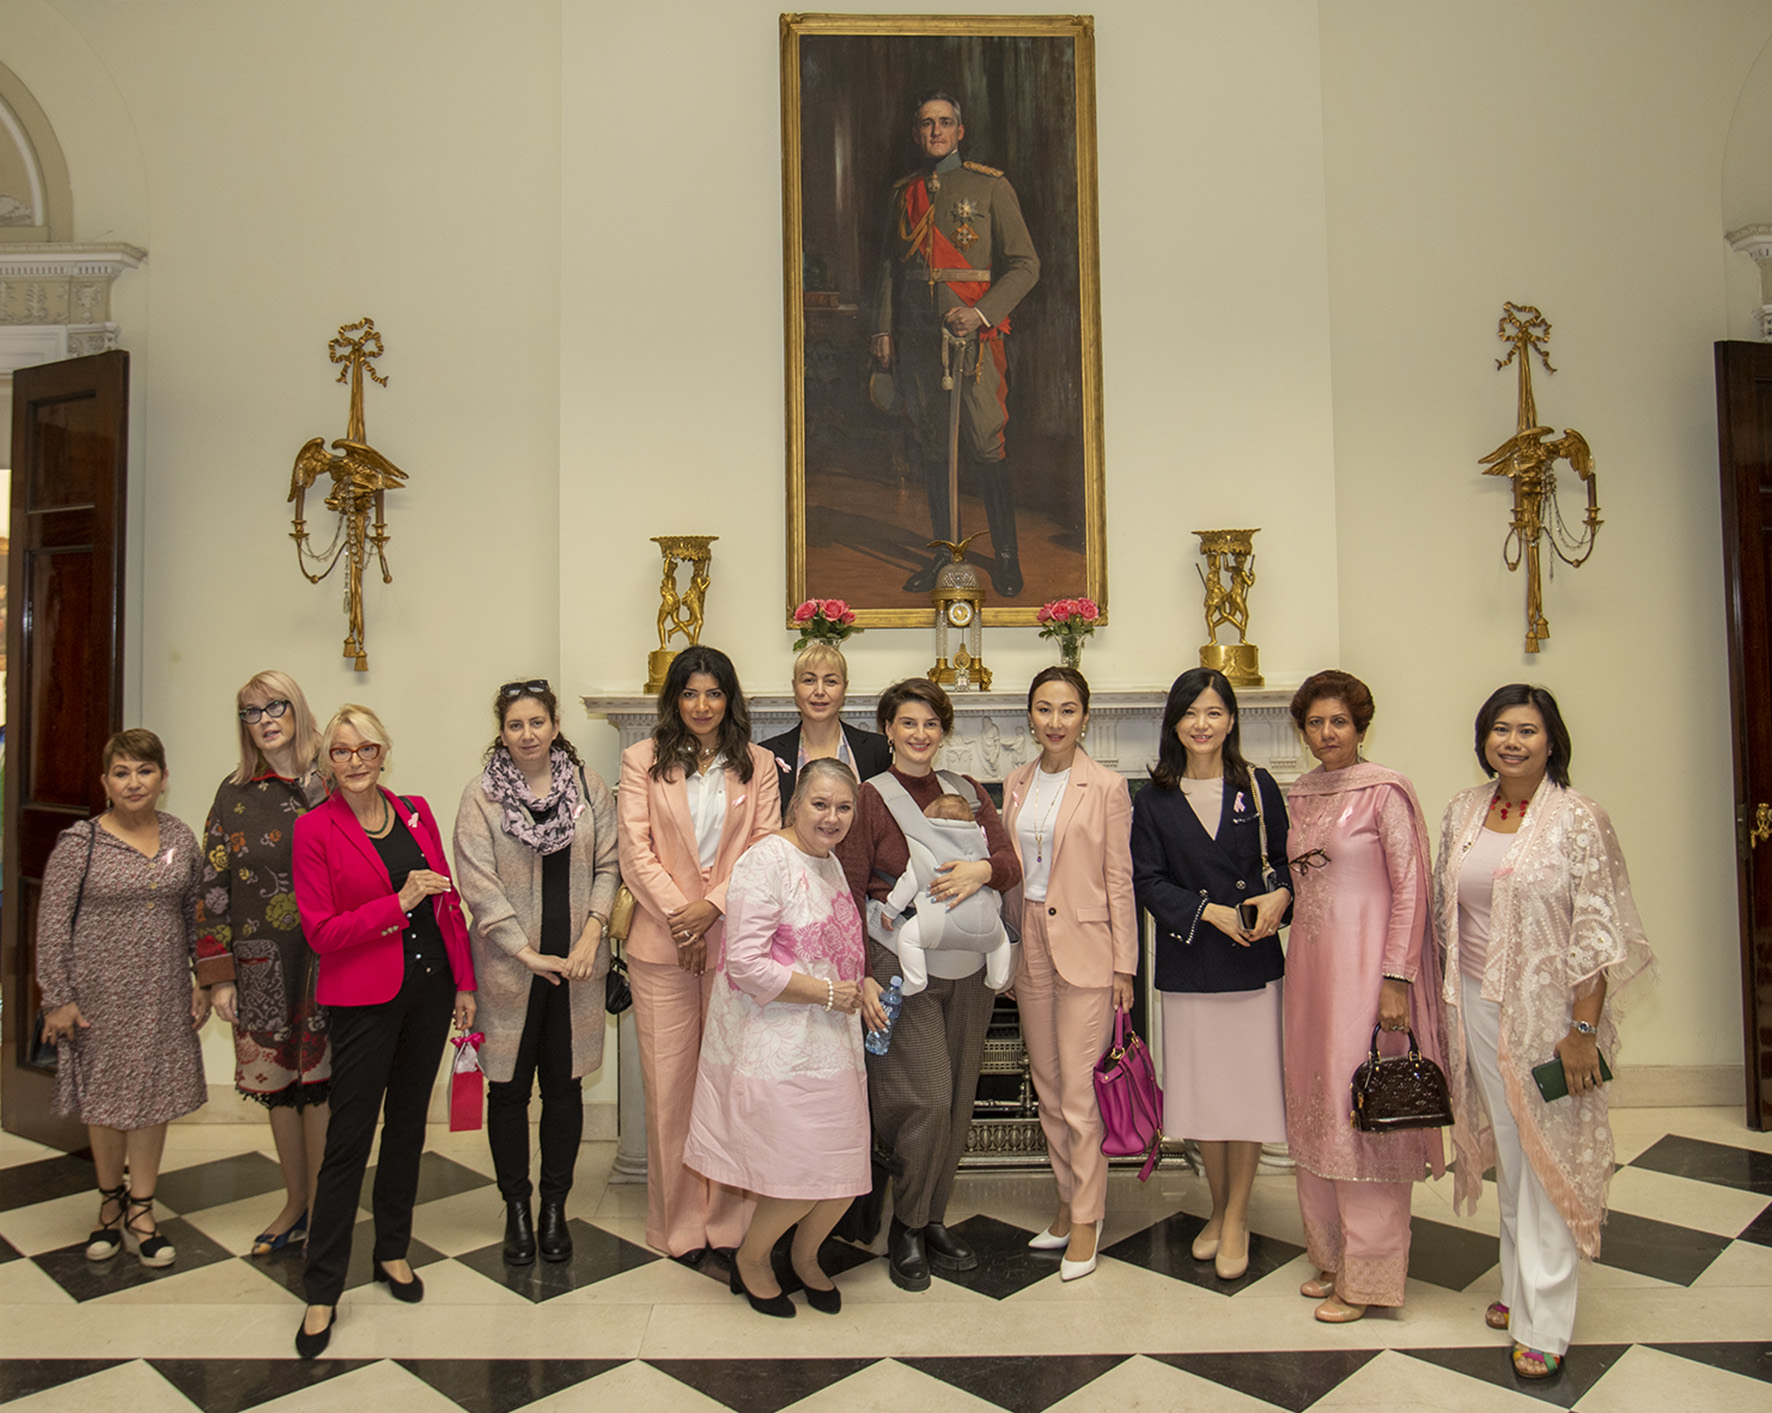 CAMPAIGN FOR BREAST CANCER AWARENESS AT THE WHITE PALACE